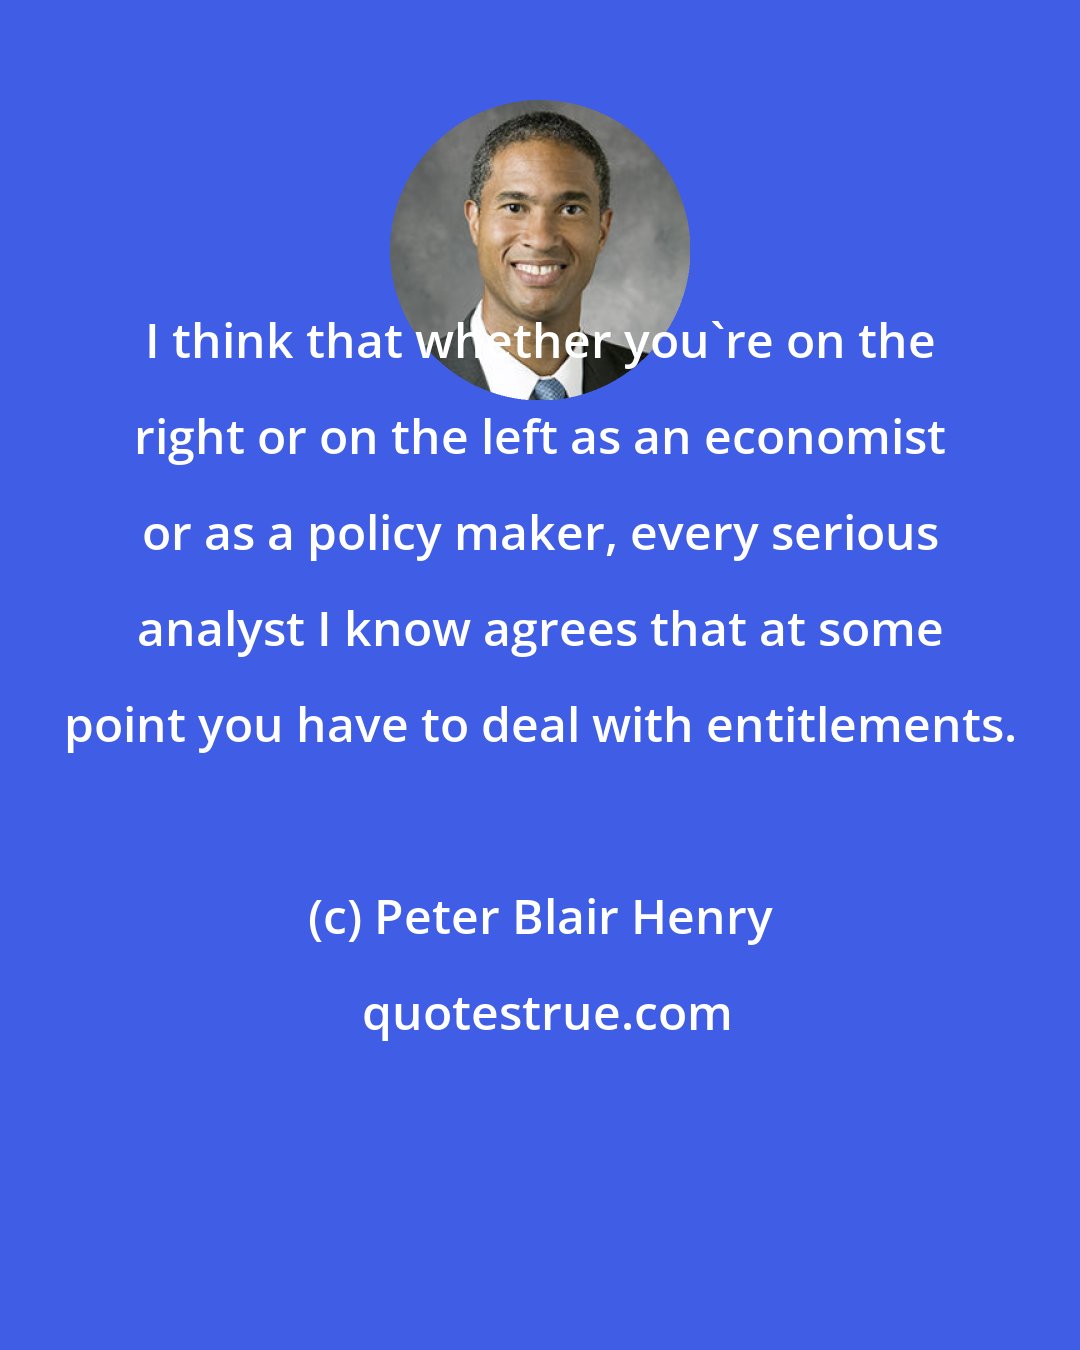 Peter Blair Henry: I think that whether you're on the right or on the left as an economist or as a policy maker, every serious analyst I know agrees that at some point you have to deal with entitlements.